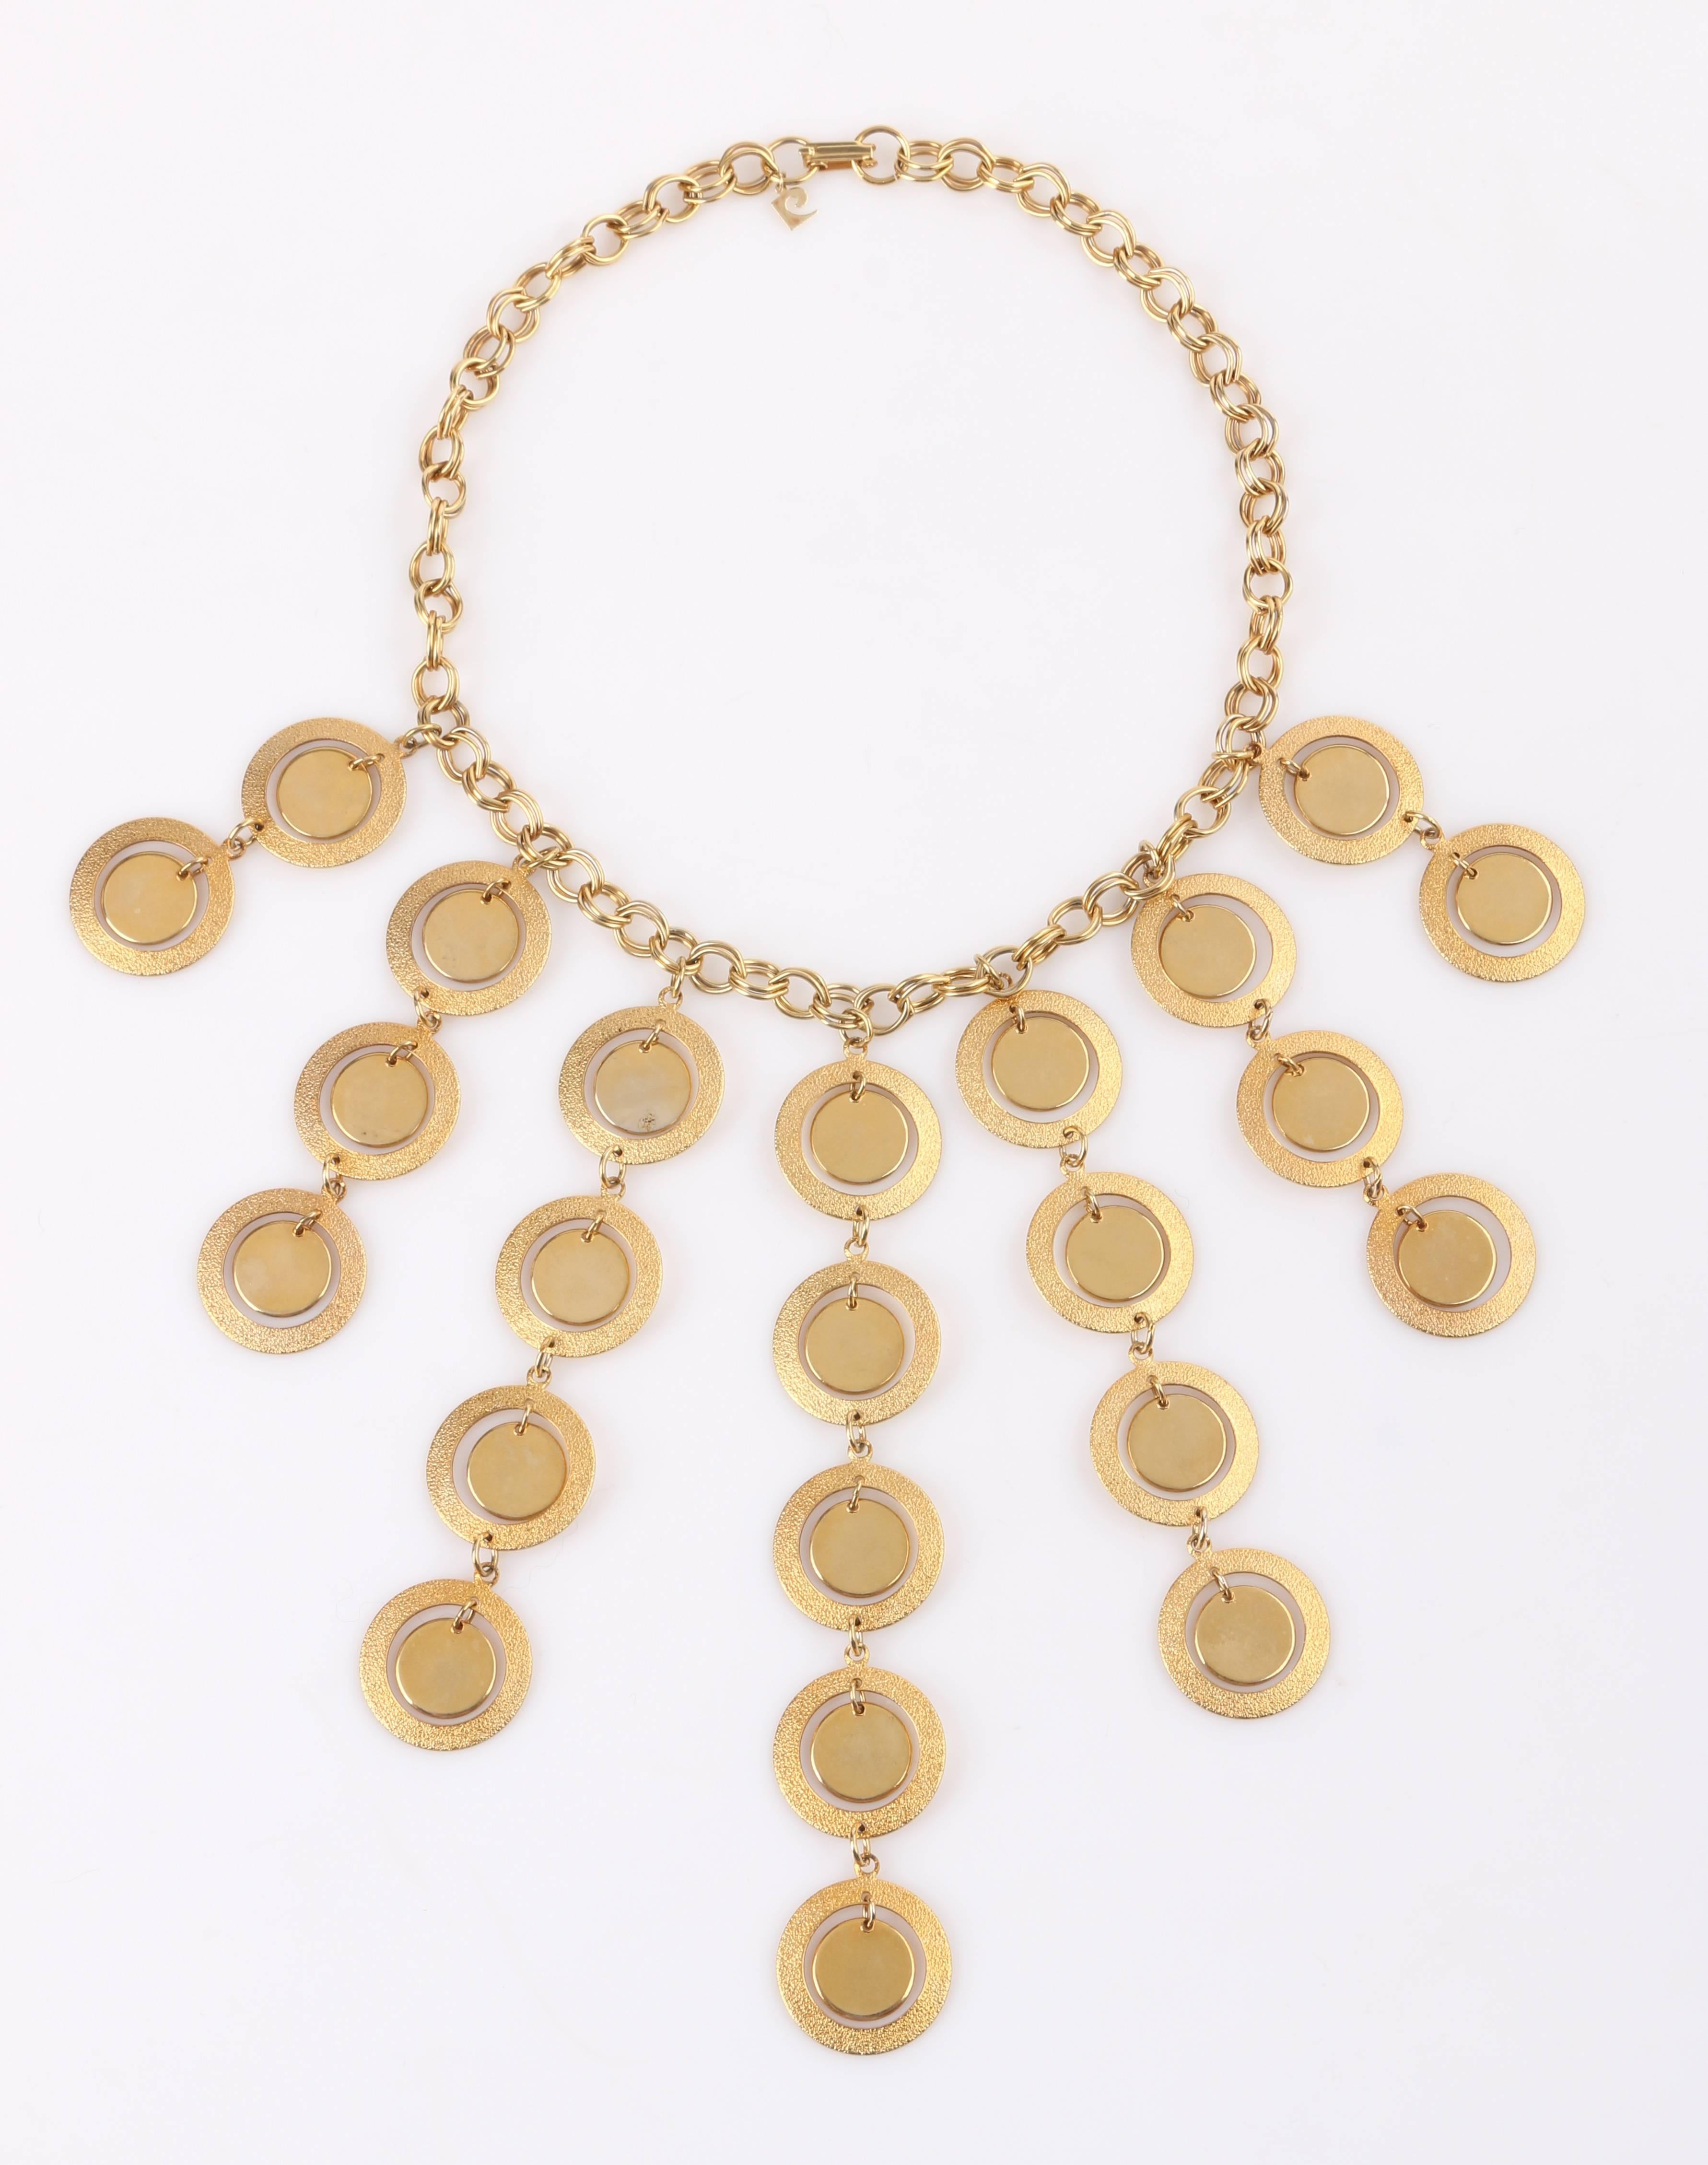 Vintage Pierre Cardin c.1960's gold modernist disc chandelier necklace. Seven varying lengths of gold-toned linked drops. Each drop is made up of textured metal outer rings and polished metal interior discs linked together by o-rings. Each drop is